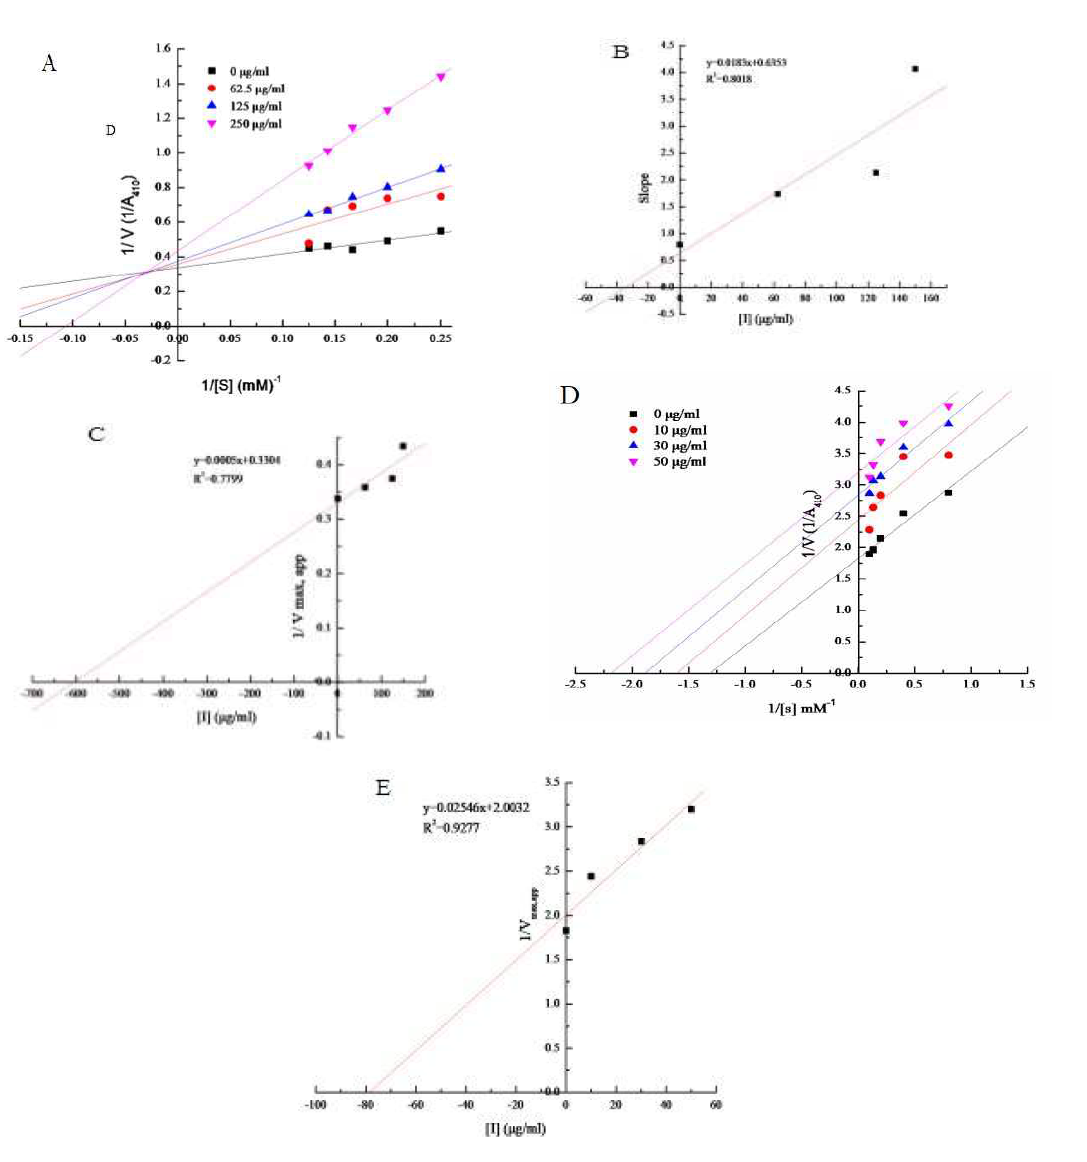 Lineweaver-Burk plotw of (A) vanadium-binding protein against S. cerevisiae a-glucosidase at different concentrations of ρNPG, and replot of the slope (B) and 1/Vmax, app (C) from the Lineweaver-Burk versus inhibitor concentration; (D) vanadium-binding protein against rat intestinal maltase and replot of the 1/Vmax, app (E) from the Lineweaver-Burk versus inhibitor concentration